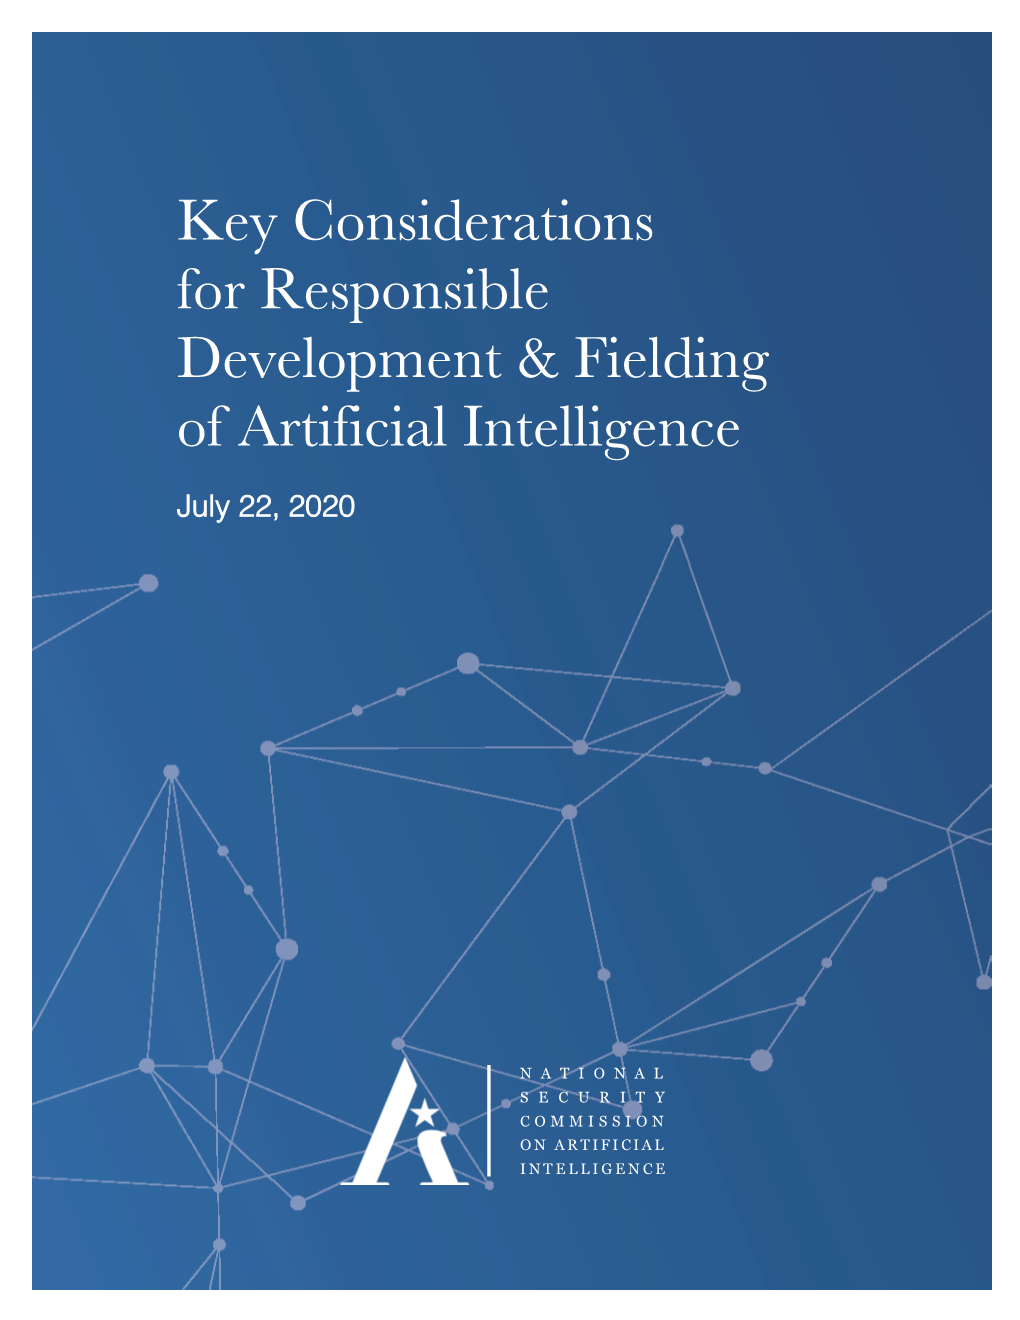 Key Considerations for Responsible Development & Fielding of Artificial